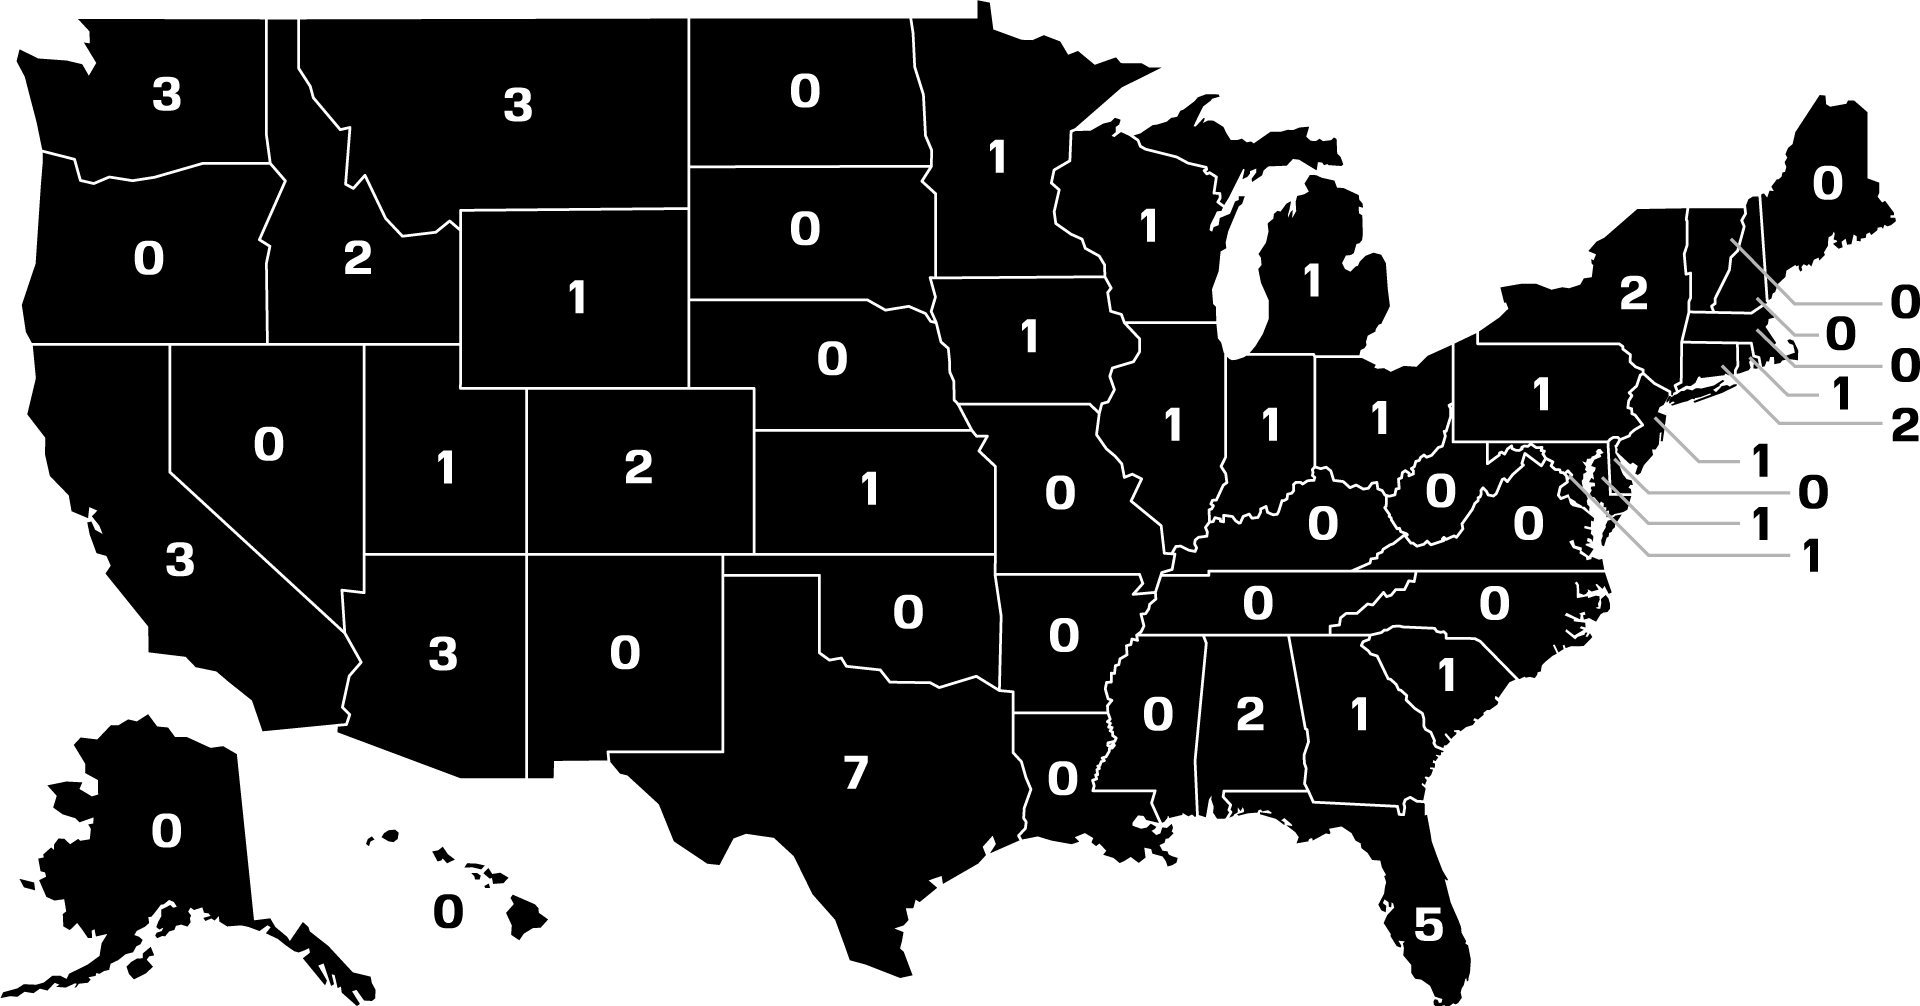 Outline map of US states with number of Conspiracy Propagandist groups.